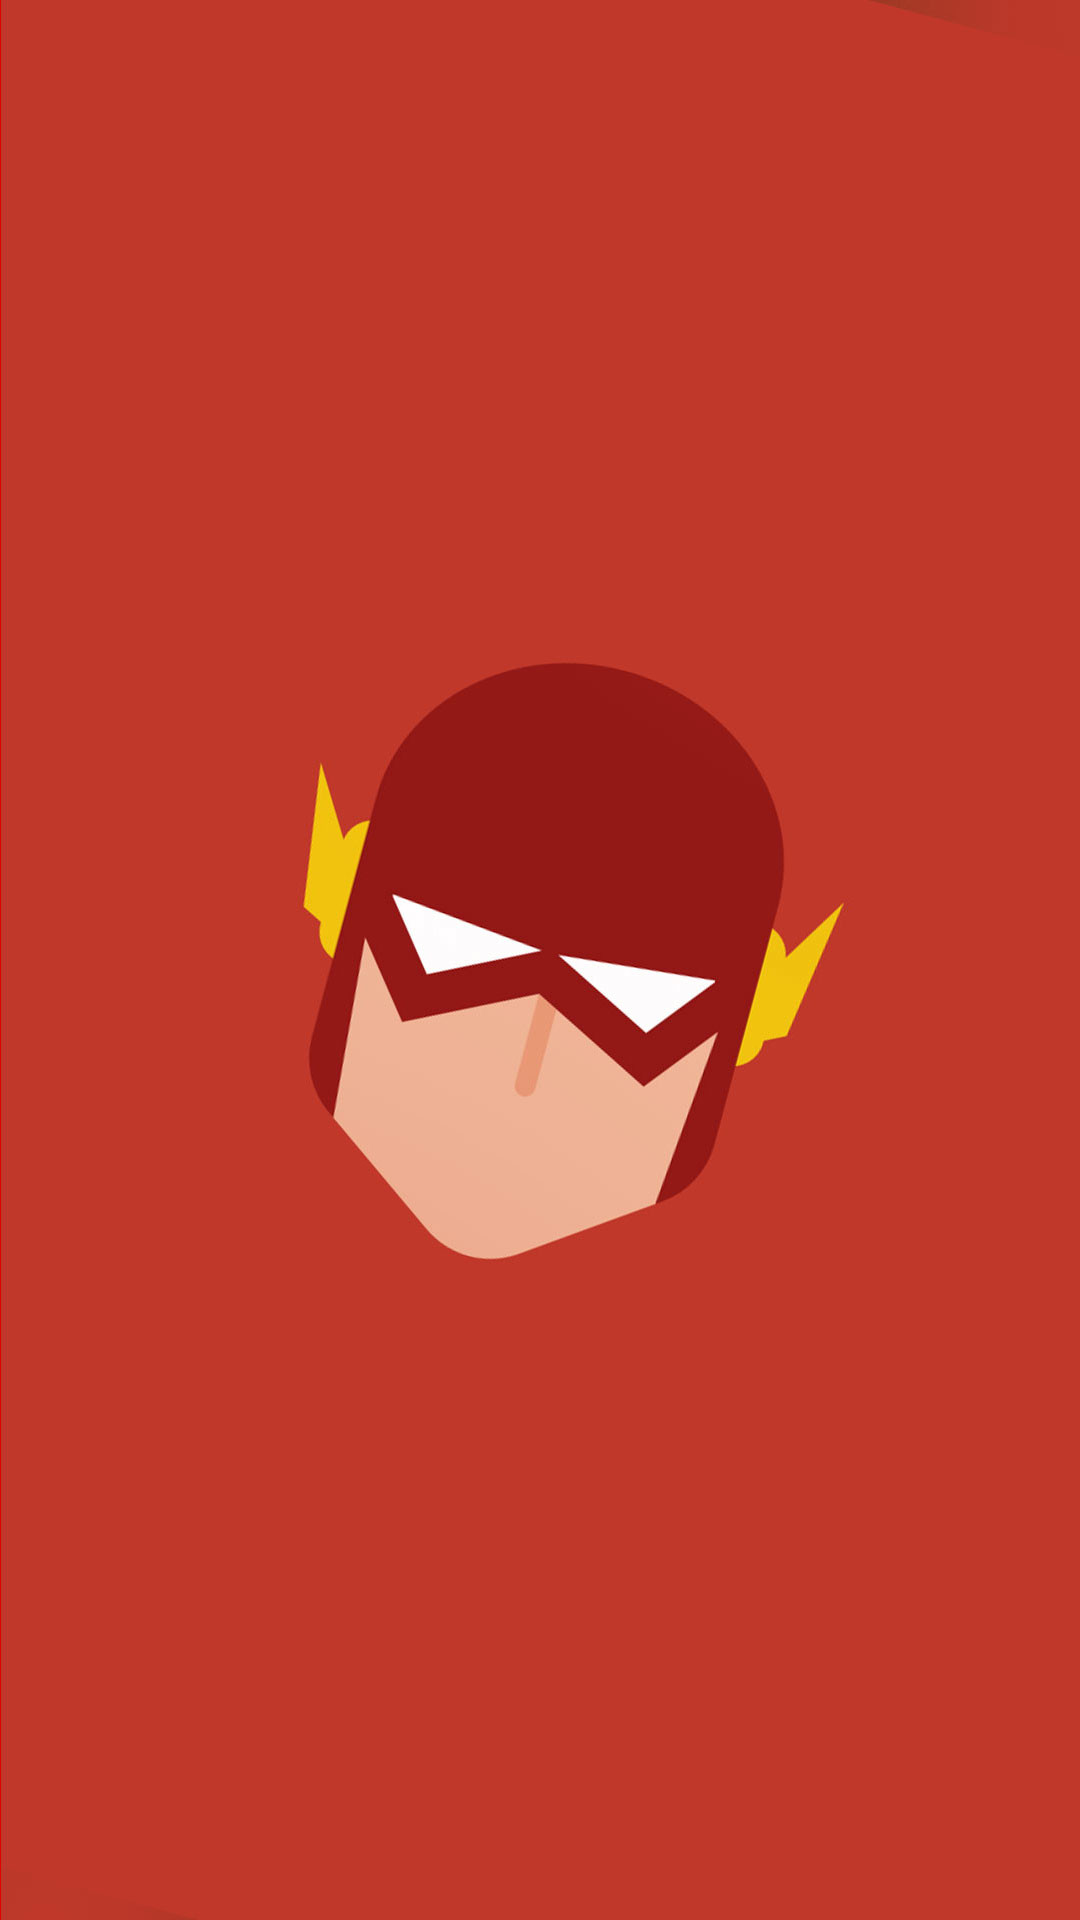 1080x1920 The Flash Symbol Wallpaper For Android - Wall For Android